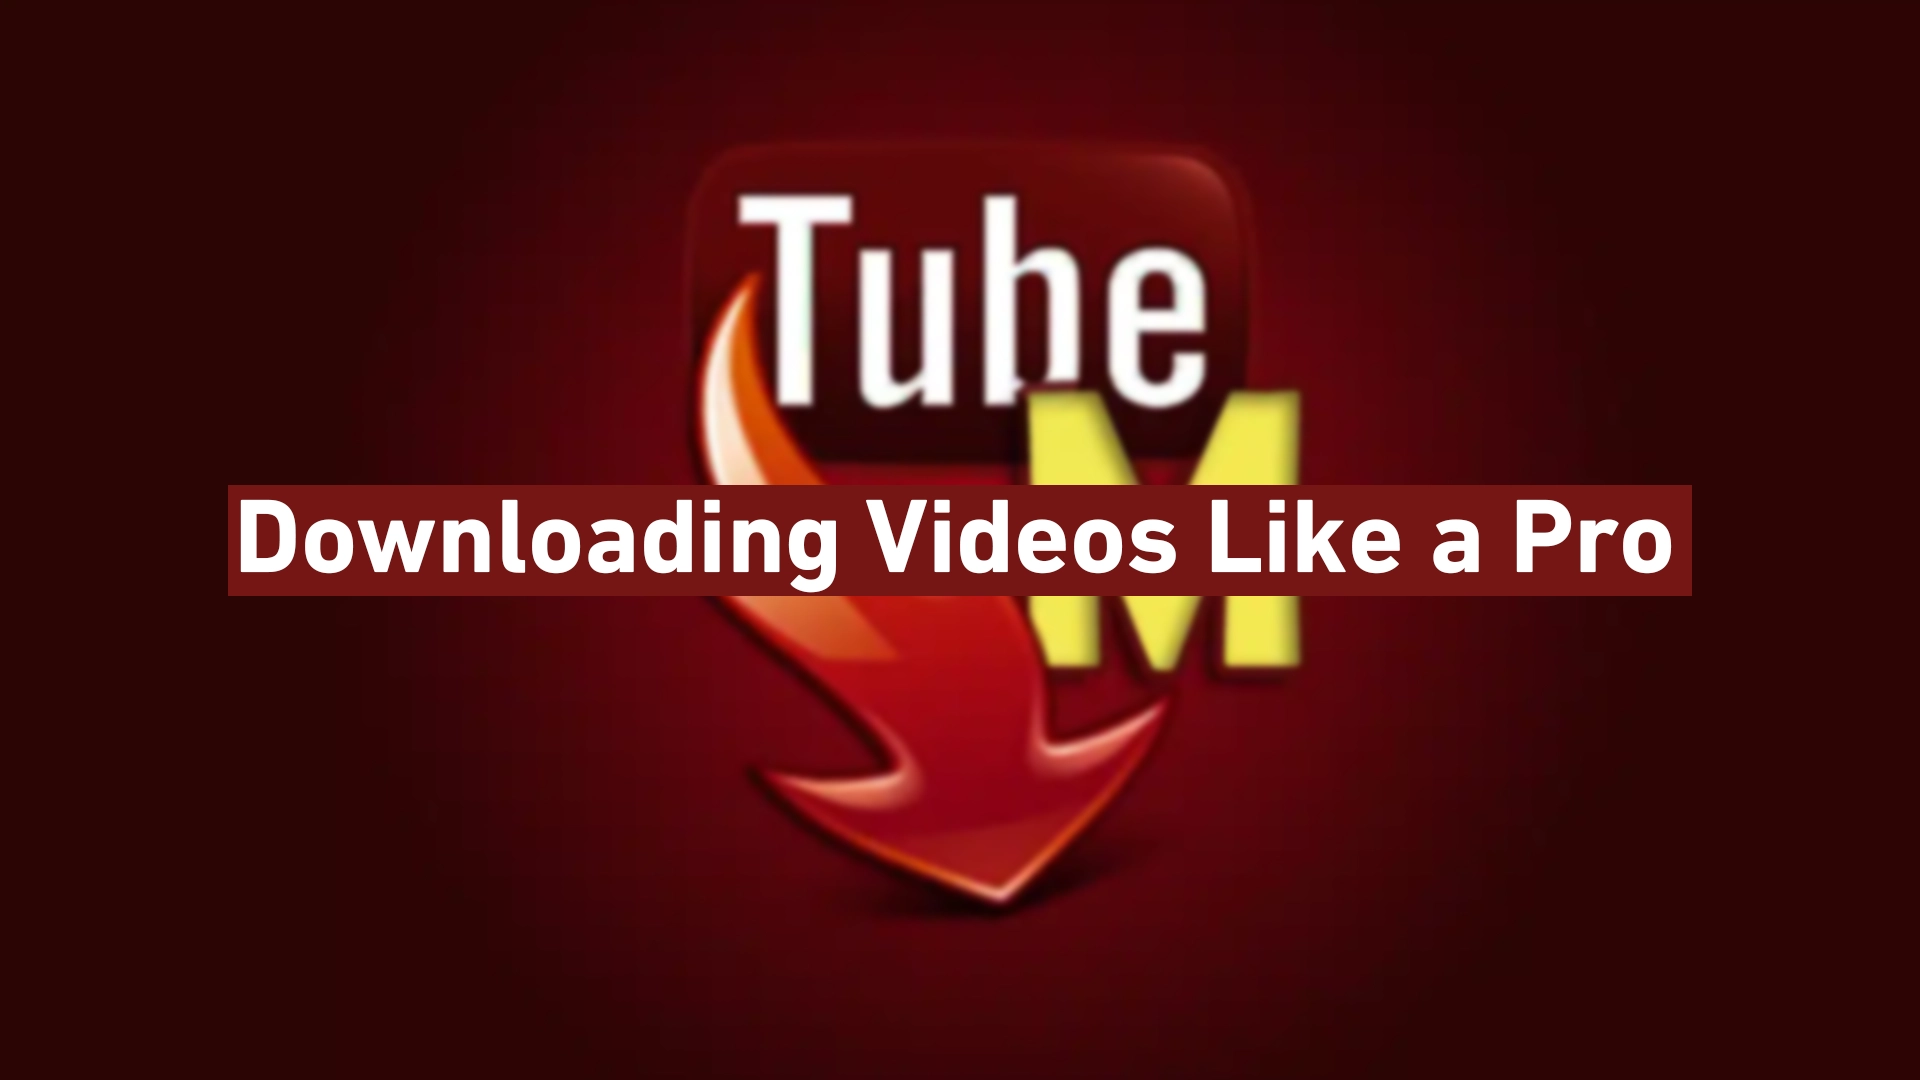 TubeMate – Downloading Videos Like a Pro